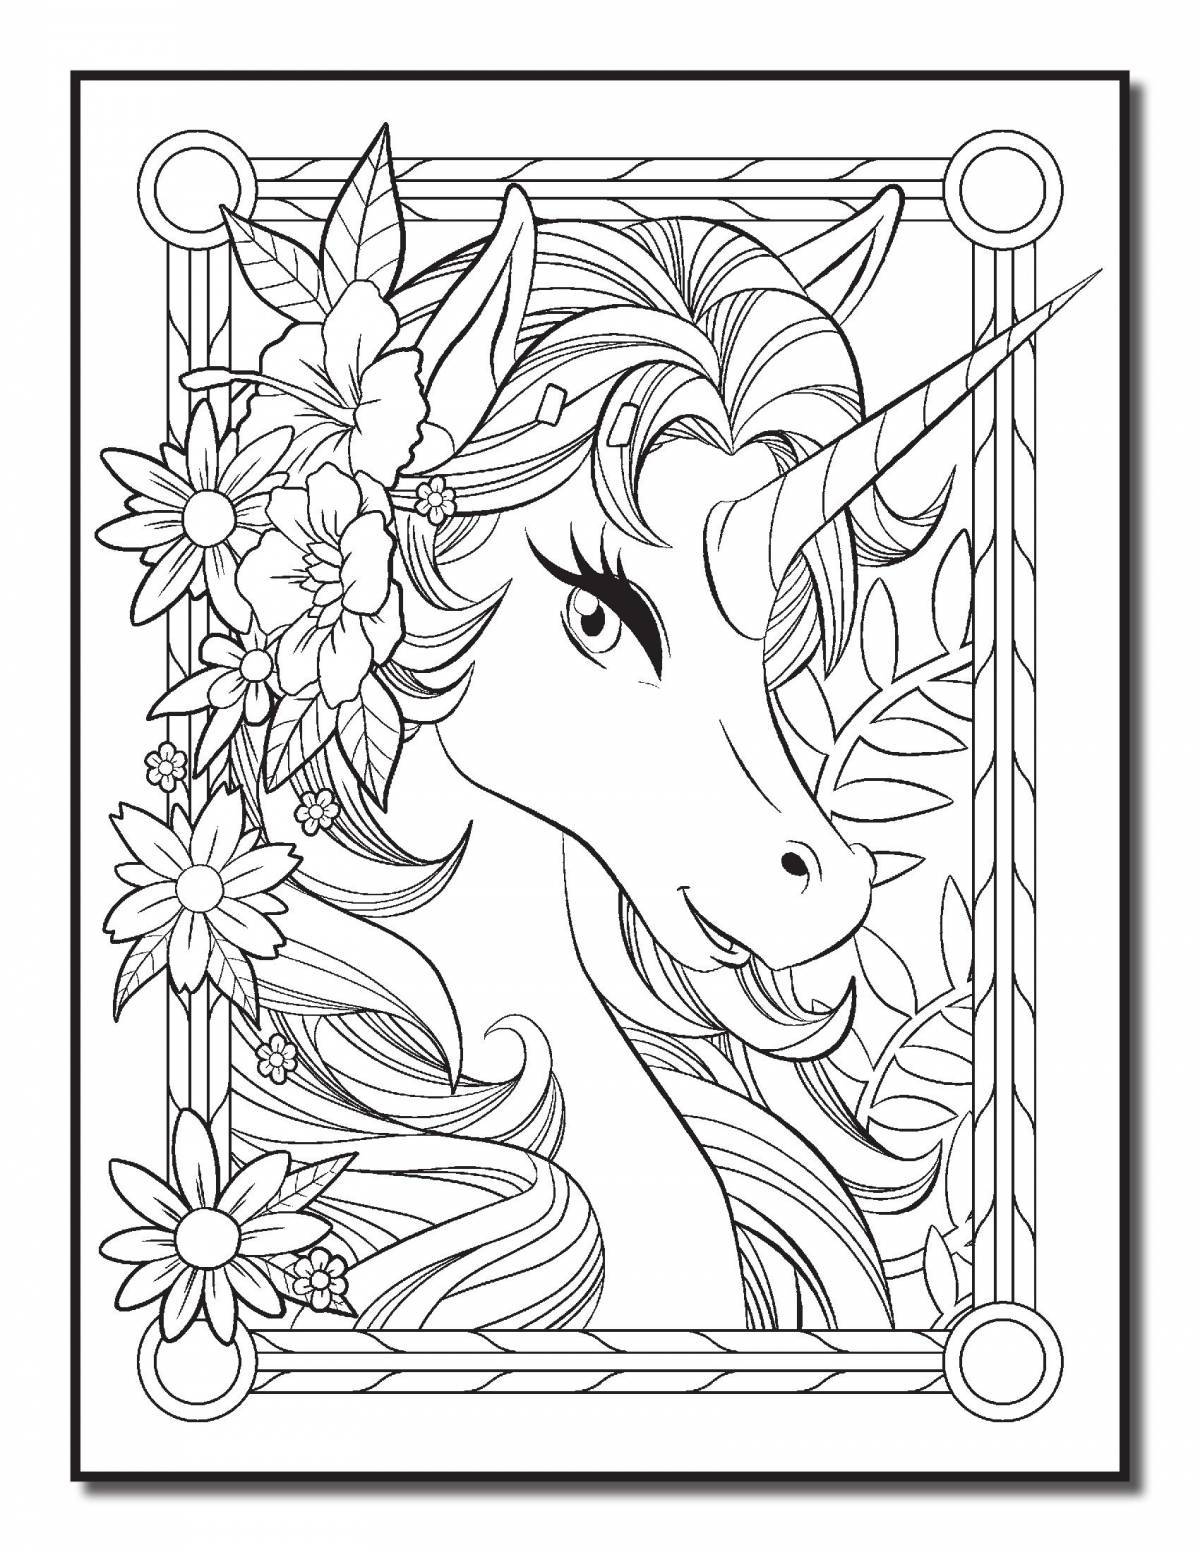 Coloring book new year 2020: delightful and charming